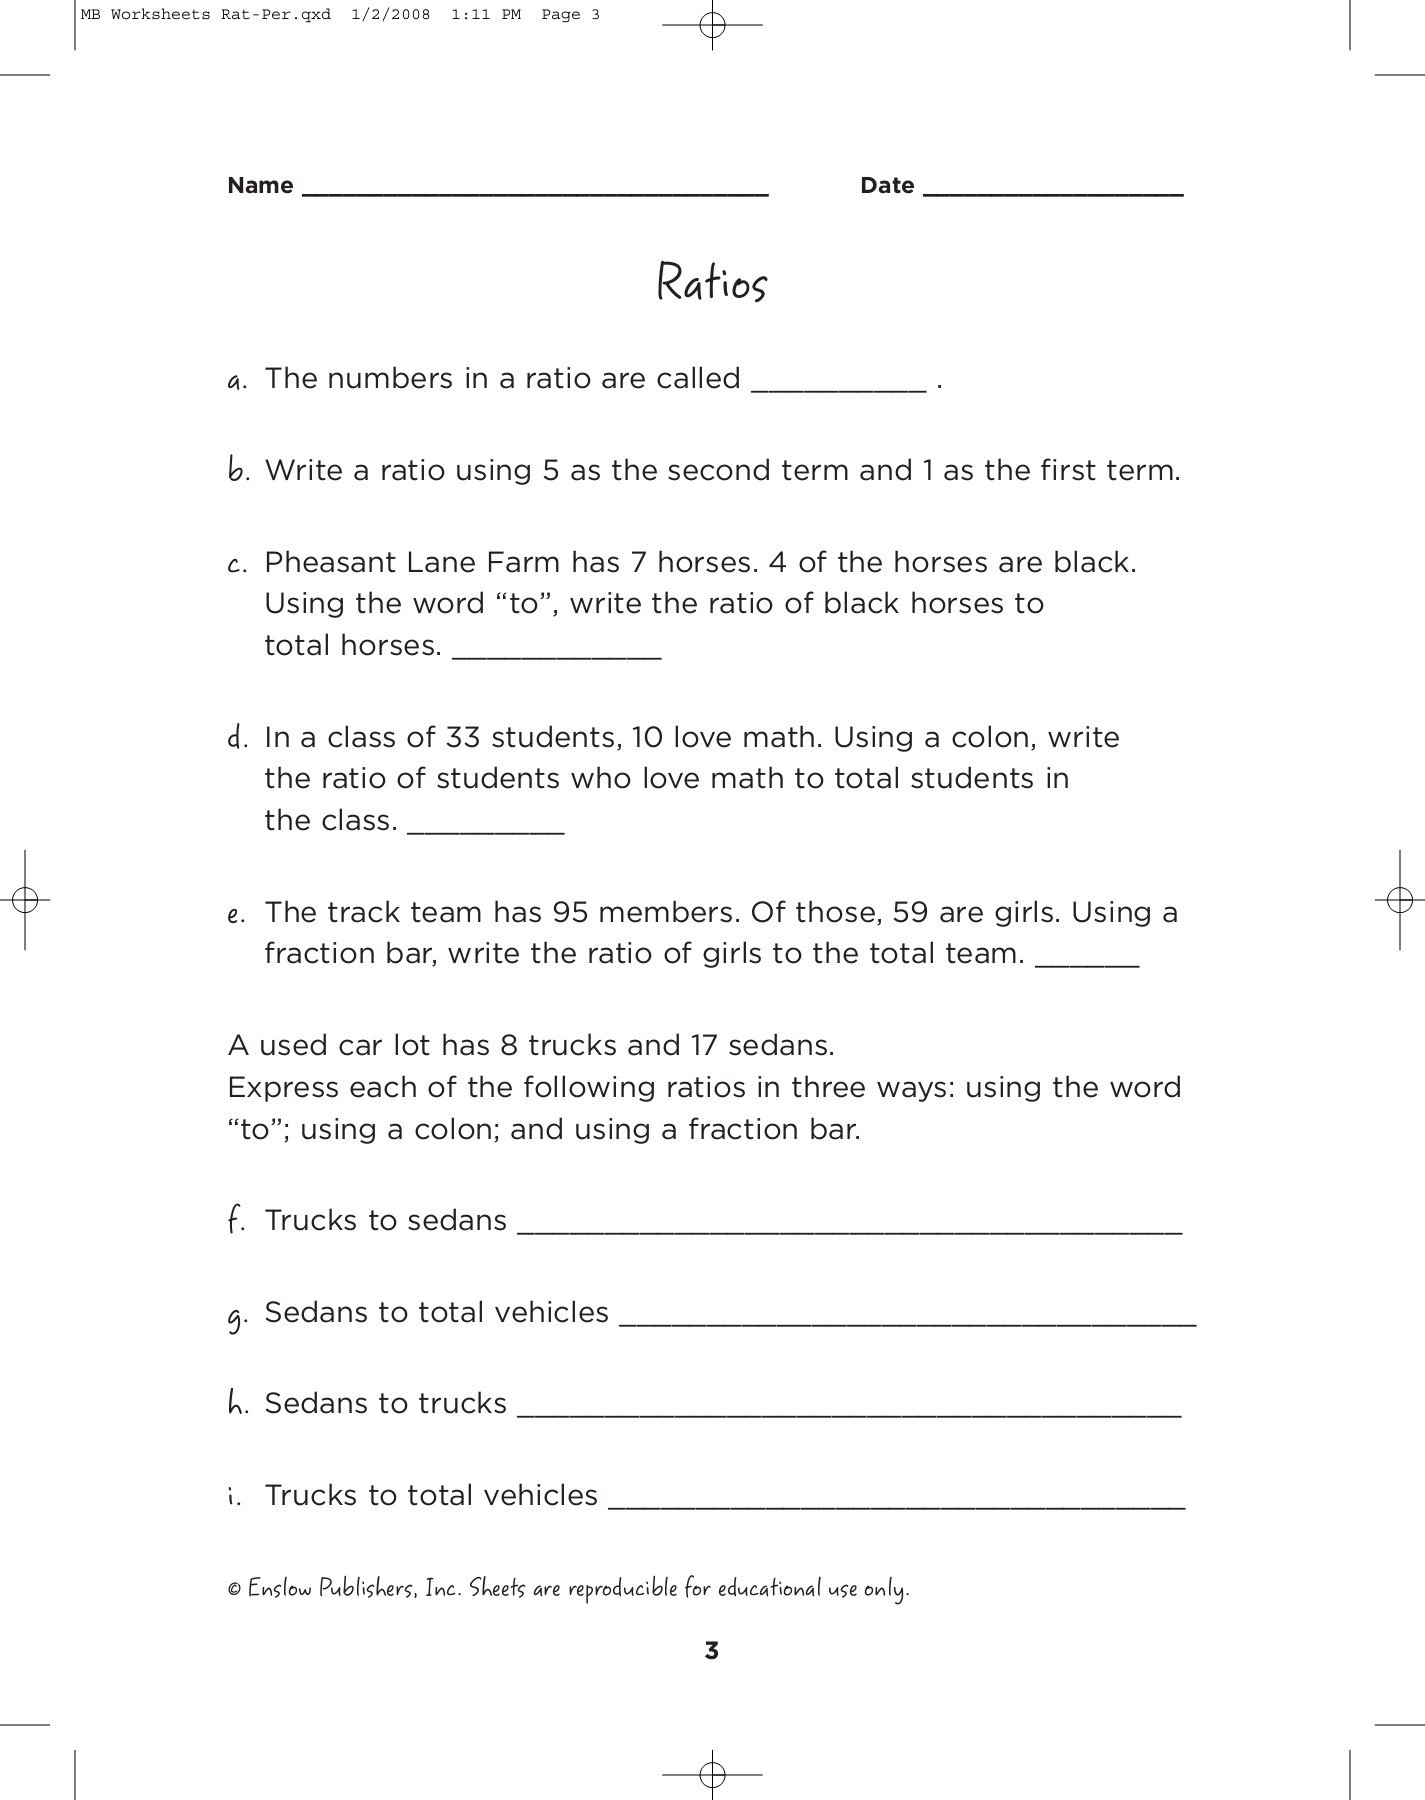 Math Busters Reproducible Worksheets  Enslow Publishers Pages 1 As Well As Writing Ratios In 3 Different Ways Worksheets